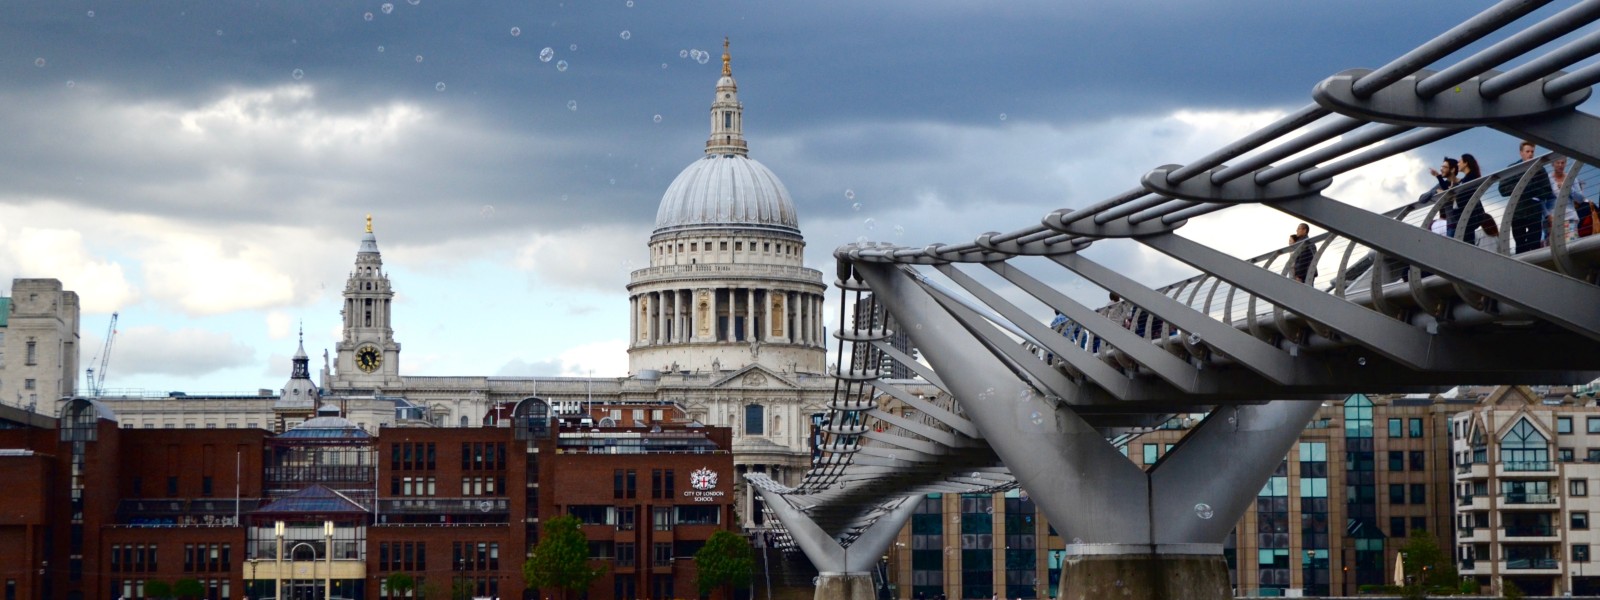 View of London Millennium Footbridge and St. Paul’s Cathedral